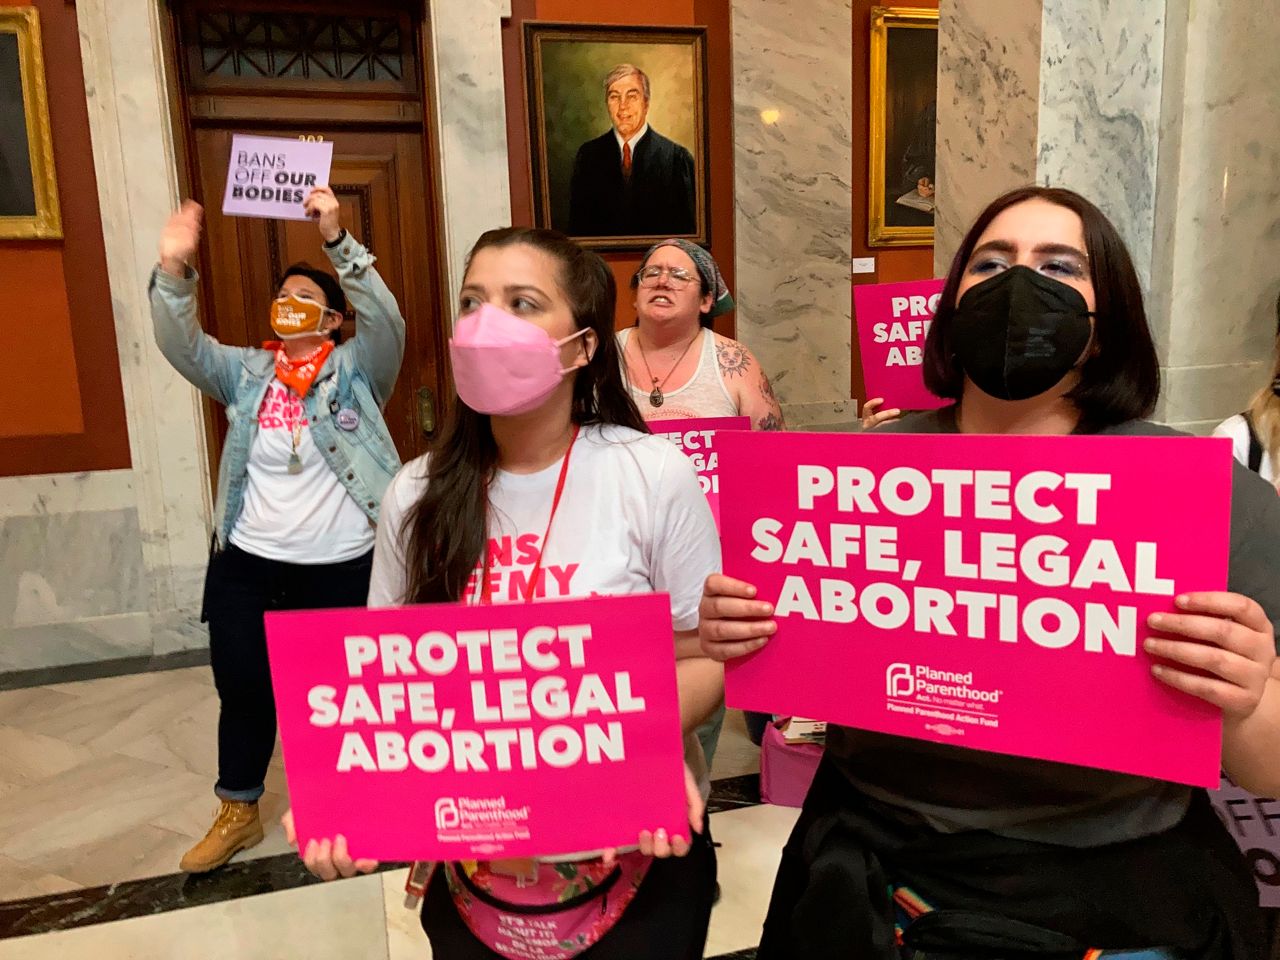 Live Updates: Ohio lawmakers, organizations react to Supreme Court overruling Roe v. Wade, constitutional right to abortion